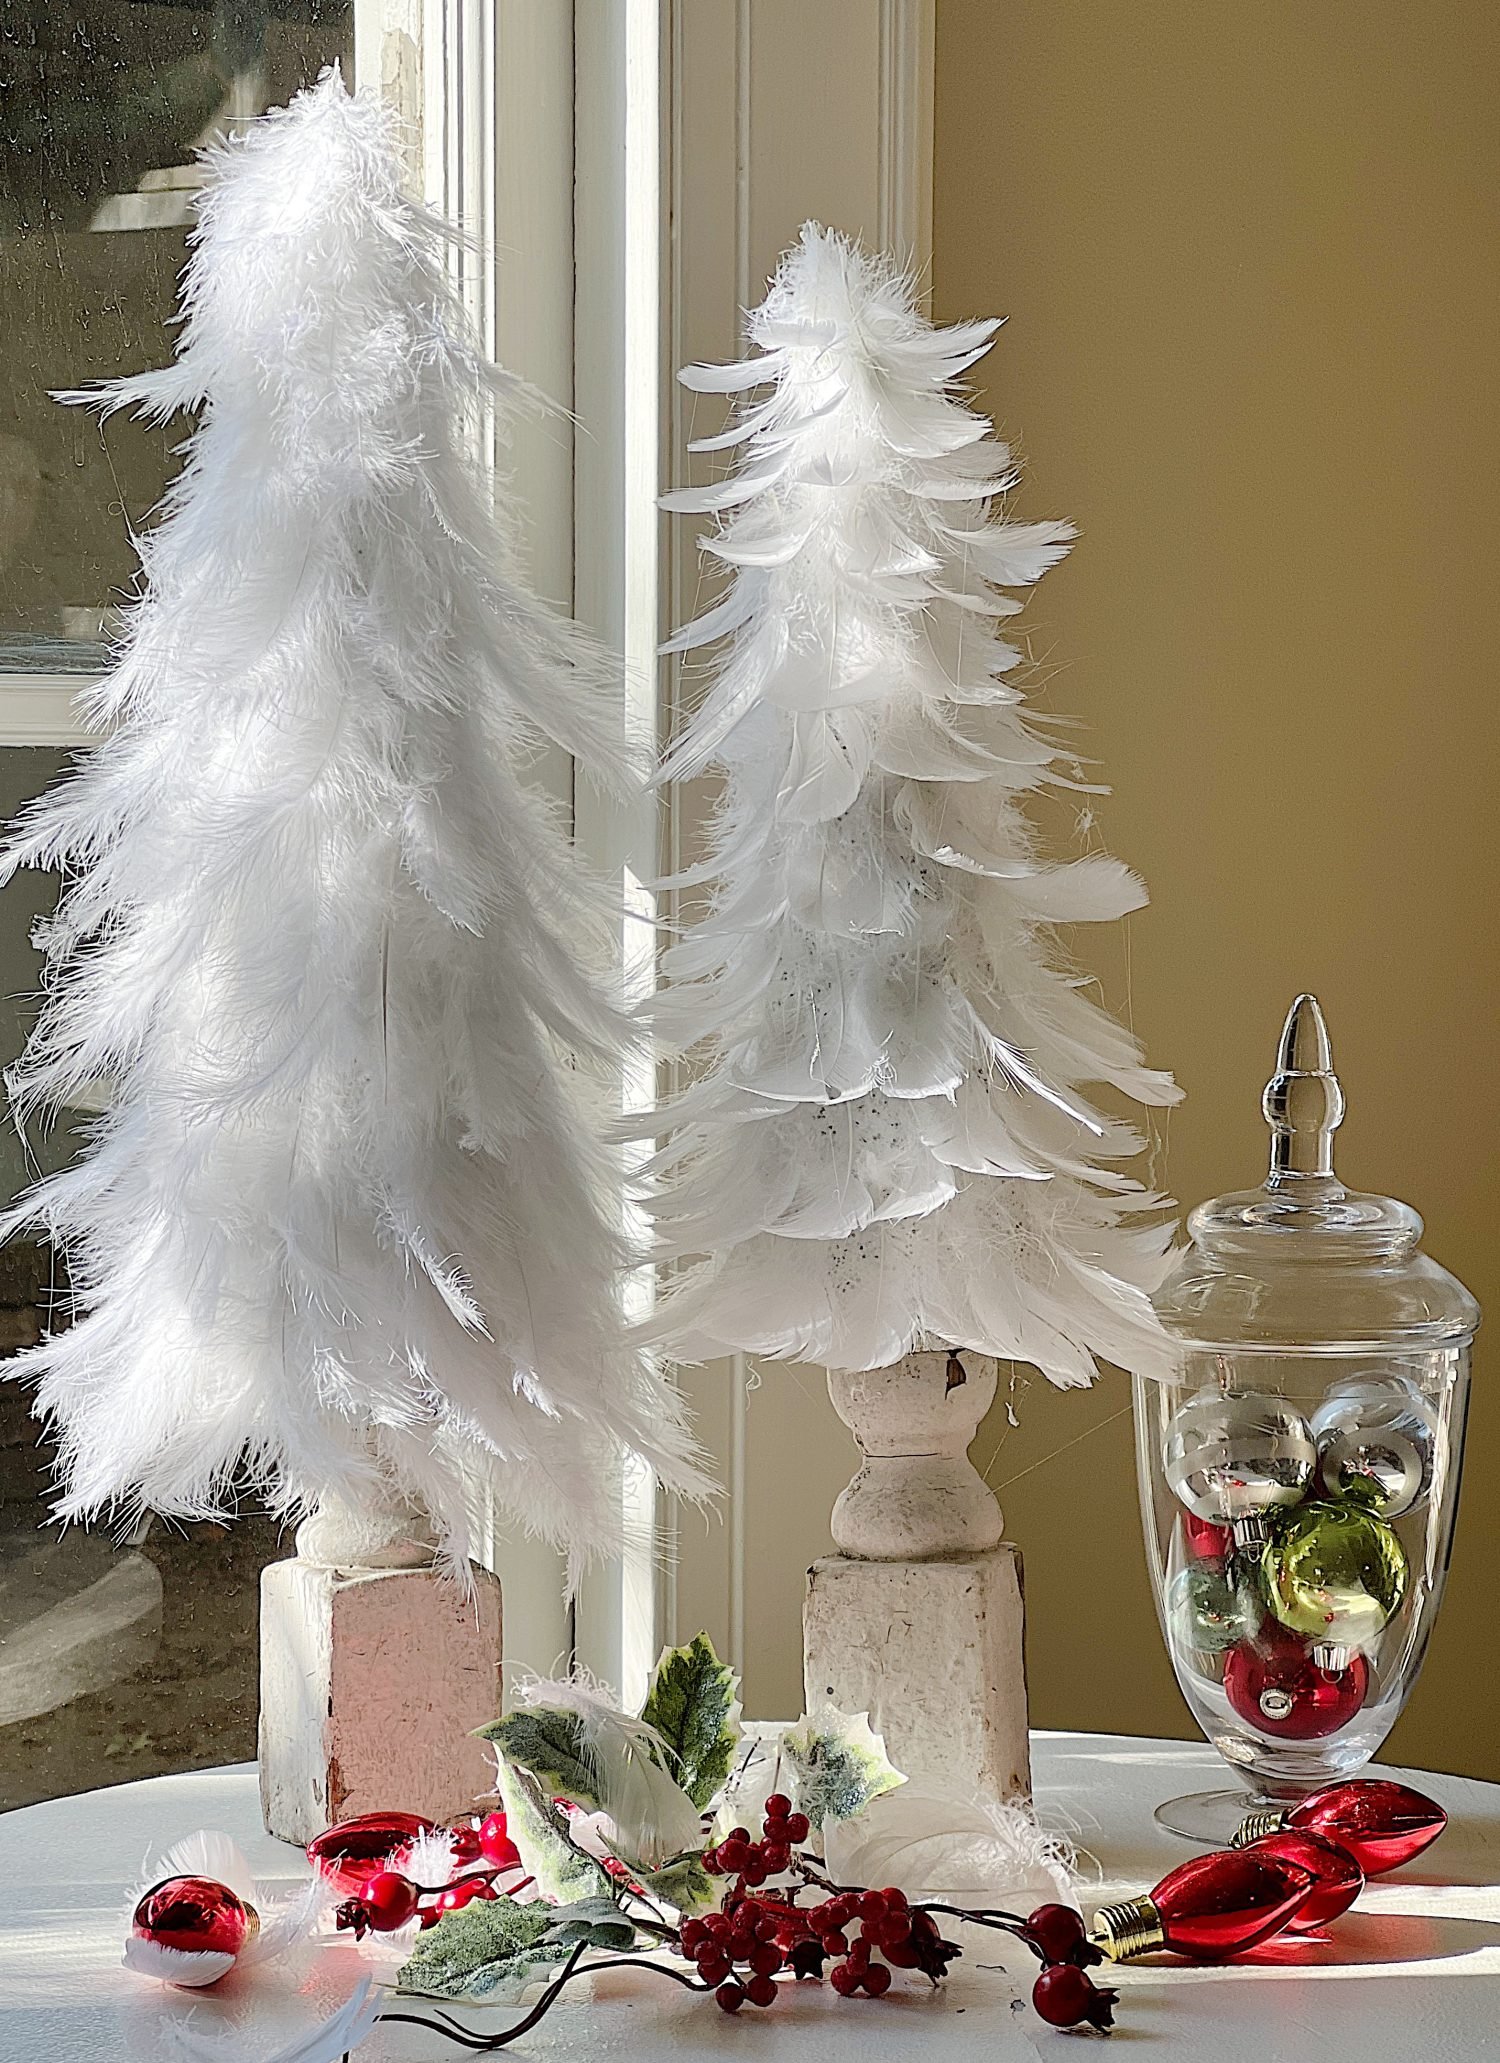 A table with two white Feather Trees and a vase.